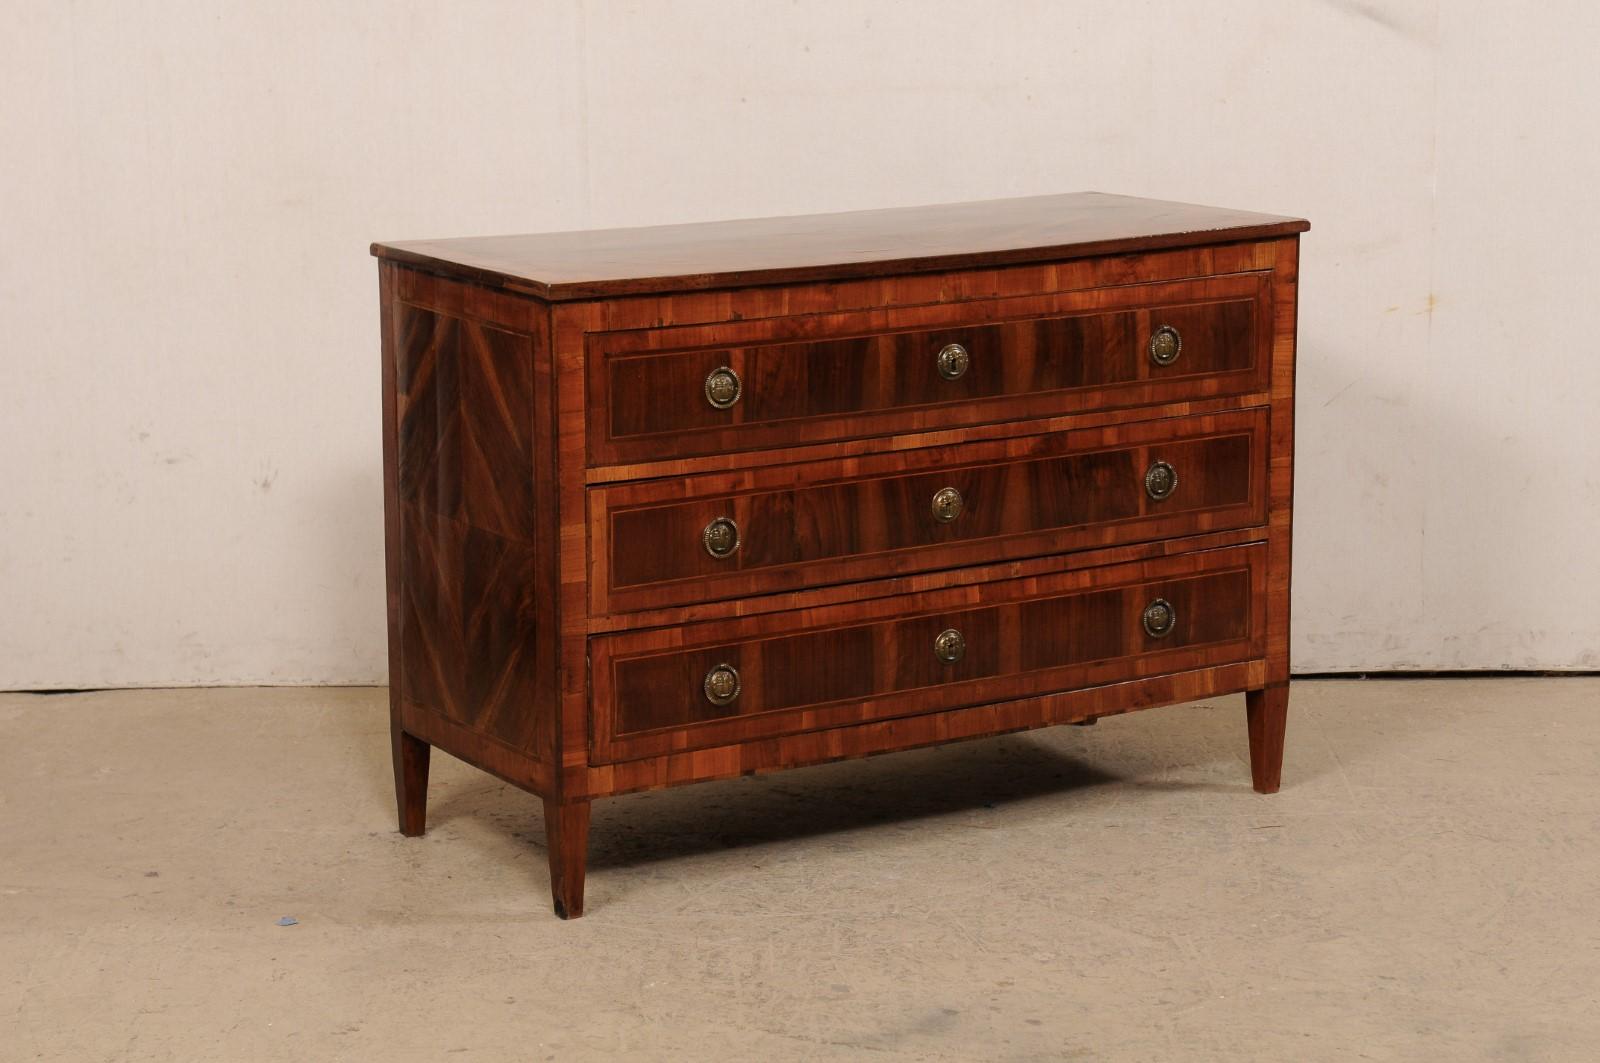 A French Empire commode with beautiful inlay and book-match veneers, from the early 19th century. This antique chest from France features a rectangular-shaped, book-match veneer top, with banding inlays defining the perimeter. The case below houses